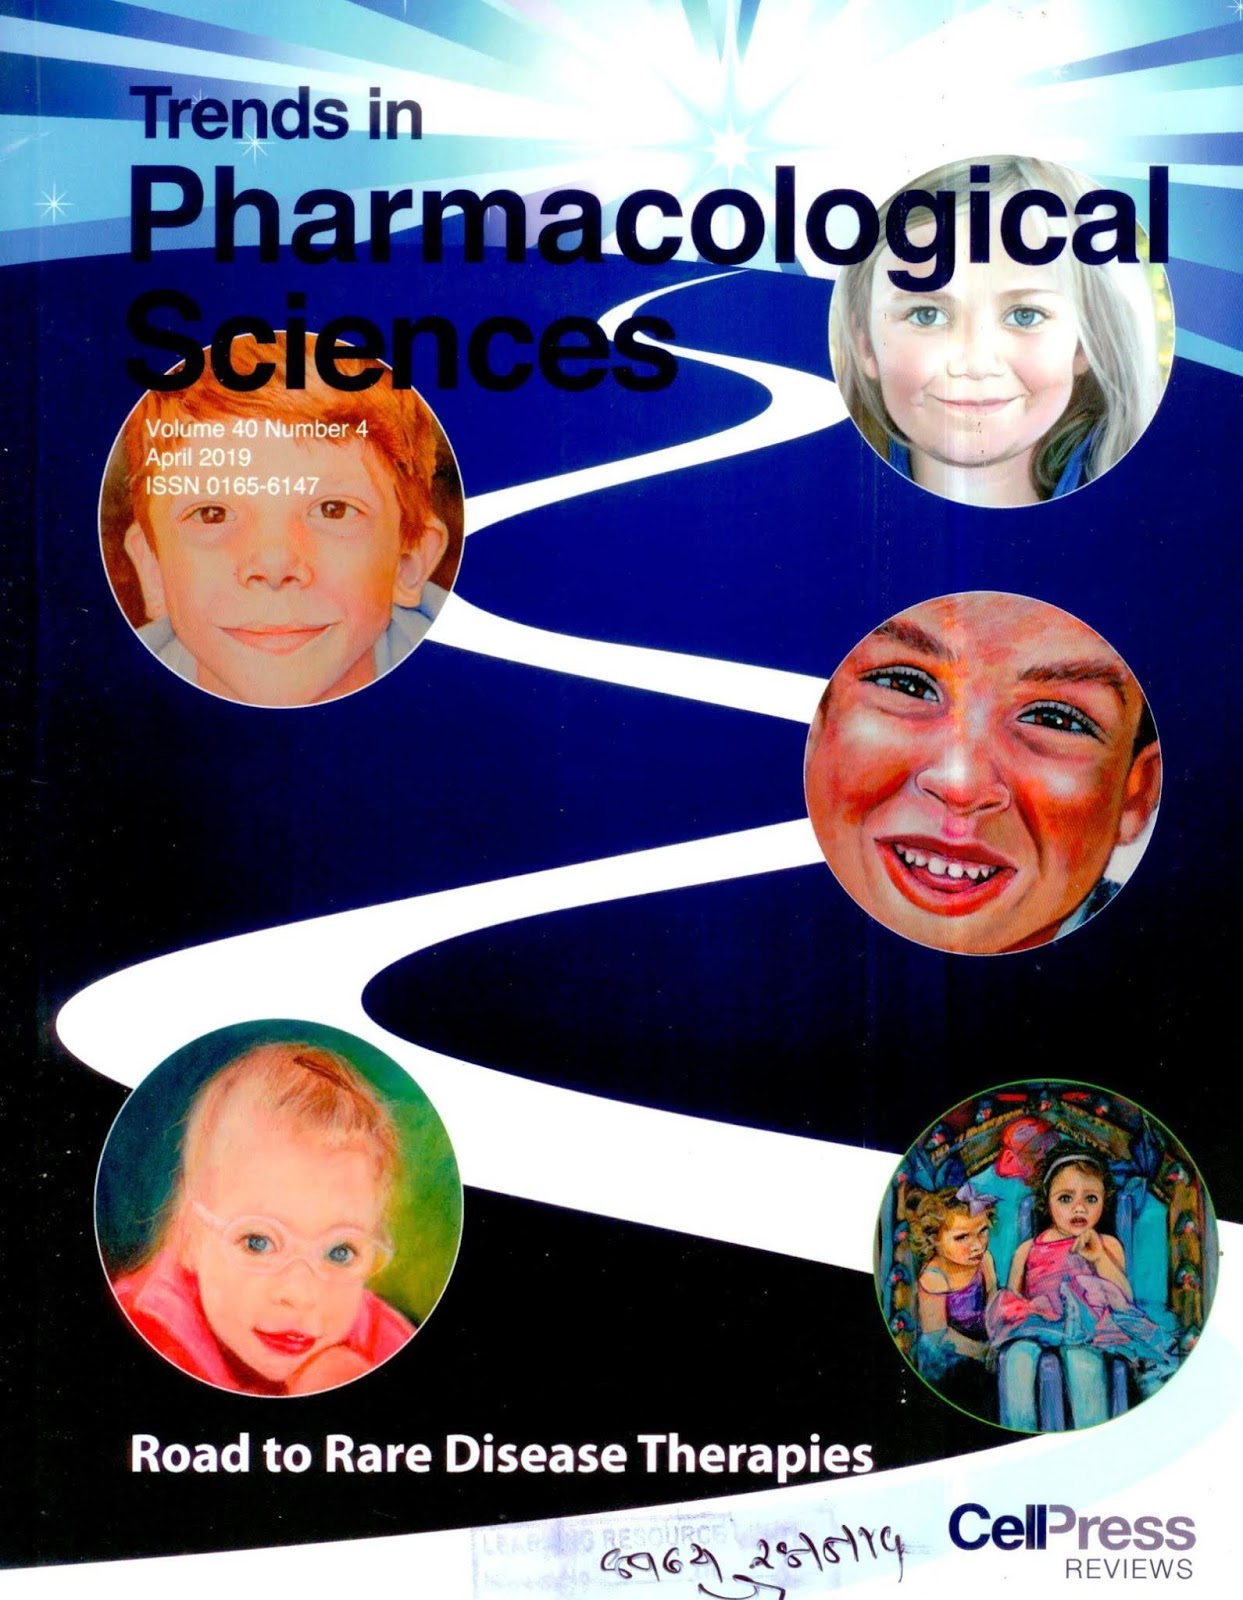 https://www.sciencedirect.com/journal/trends-in-pharmacological-sciences/vol/40/issue/4